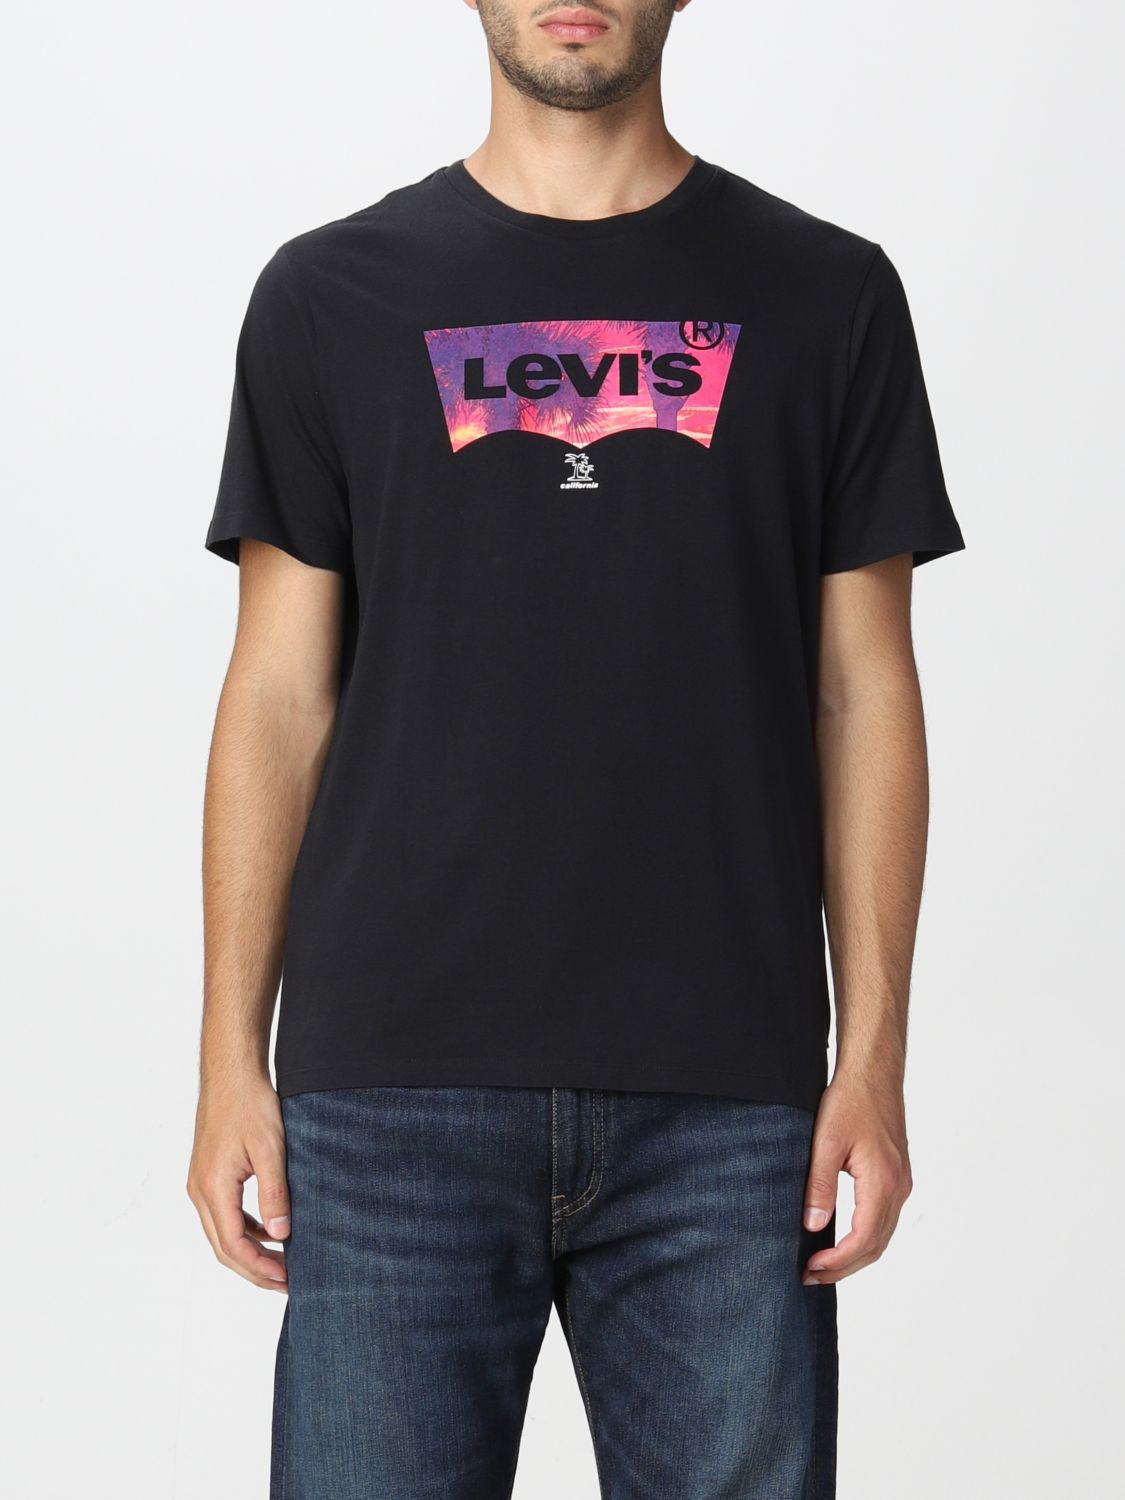 LEVI'S: t-shirt for man - Charcoal | Levi's t-shirt 224911120 online on  